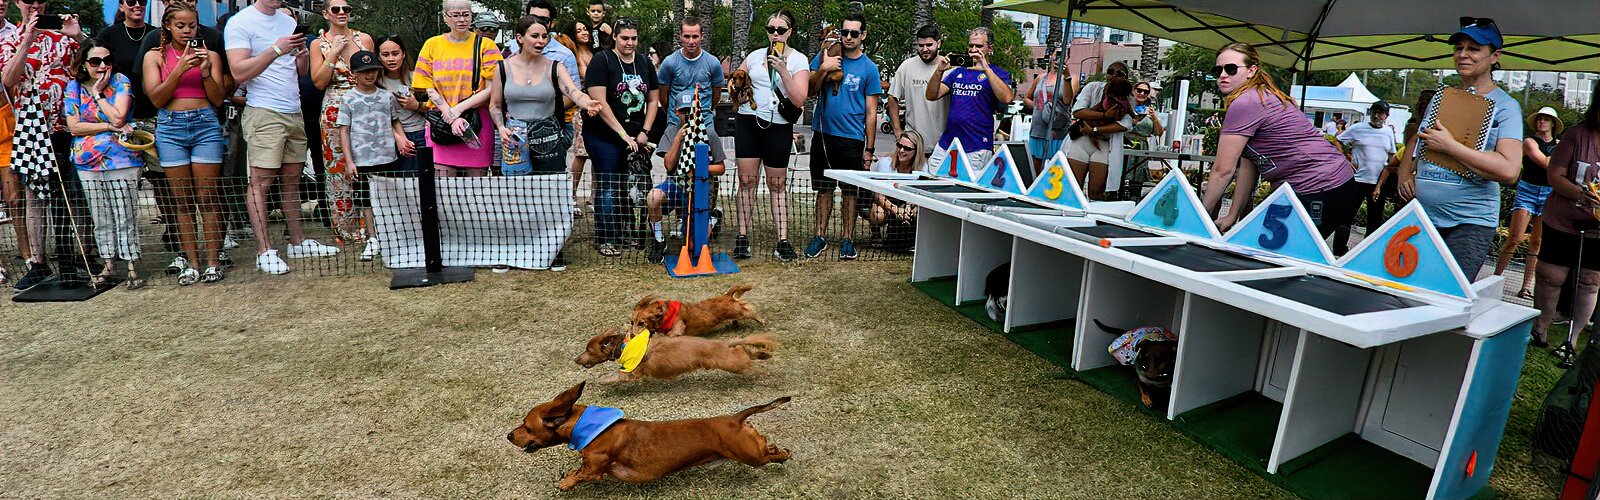 Florida Wiener Dog Derby contestants burst out of the starting gate on Saturday, May 6th at Tampa Riverfest, the free, two-day event held the first weekend of May each year along the Tampa Riverwalk.